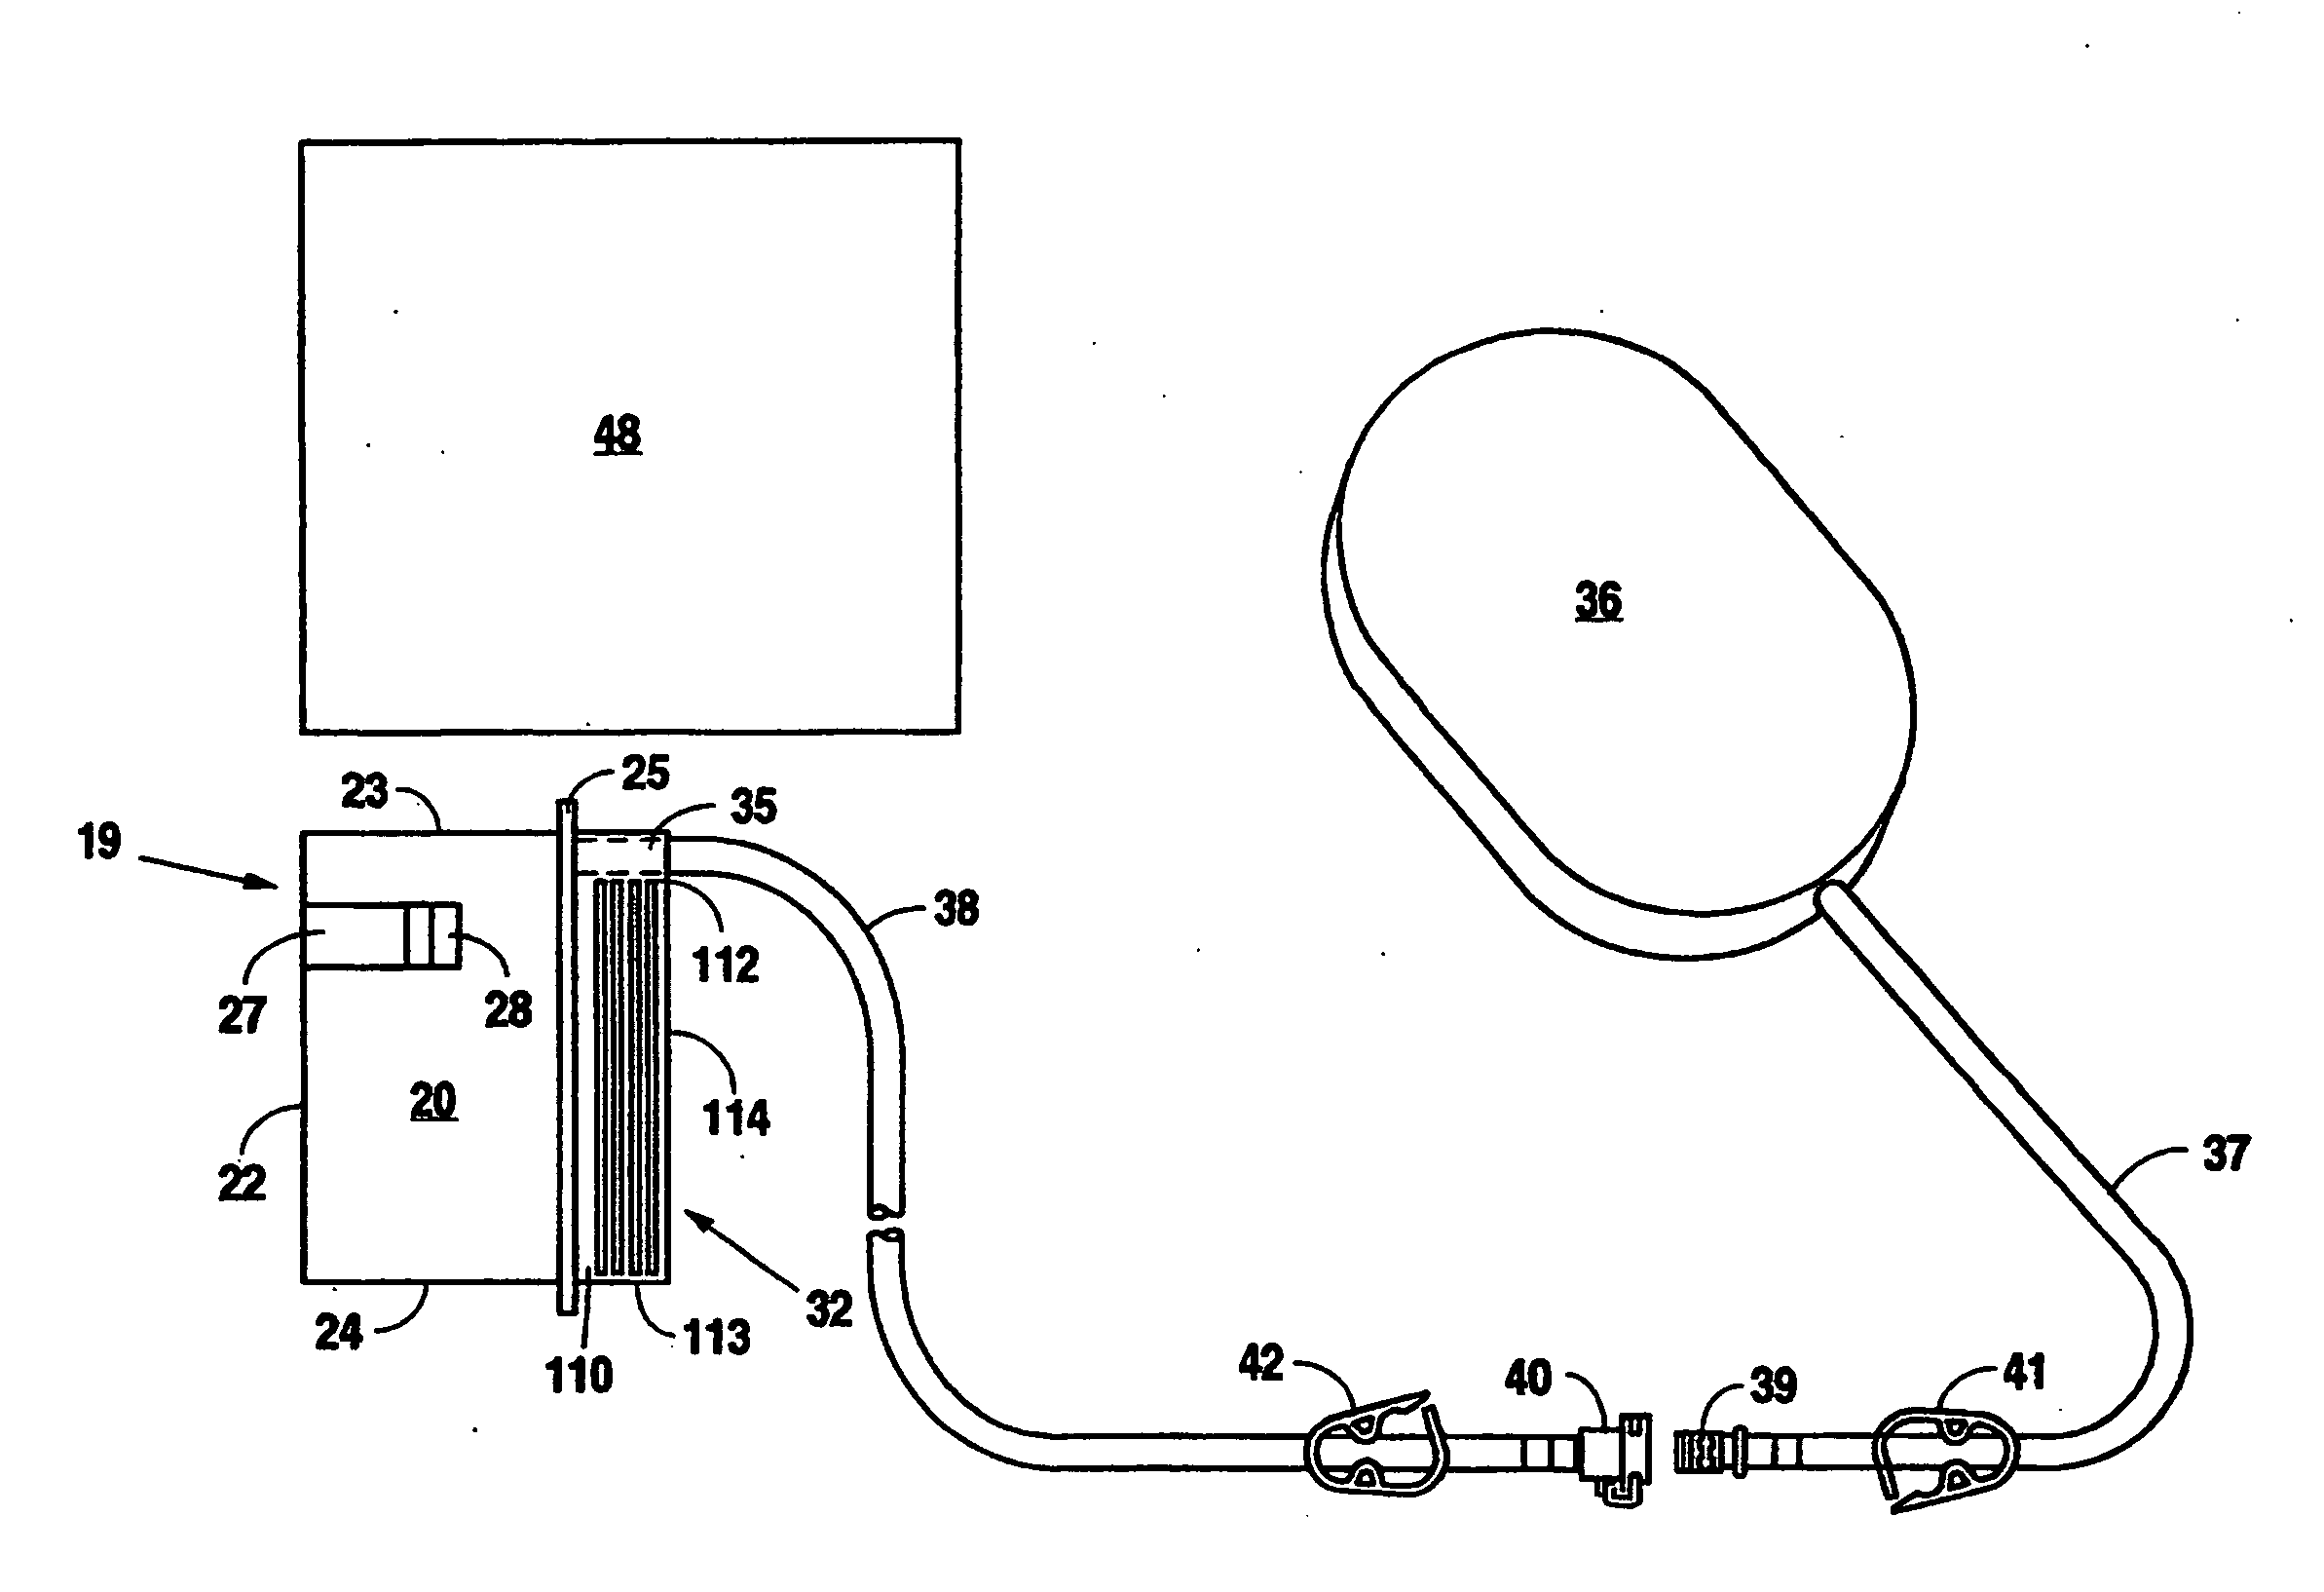 Reduced pressure treatment system having a dual porosity pad